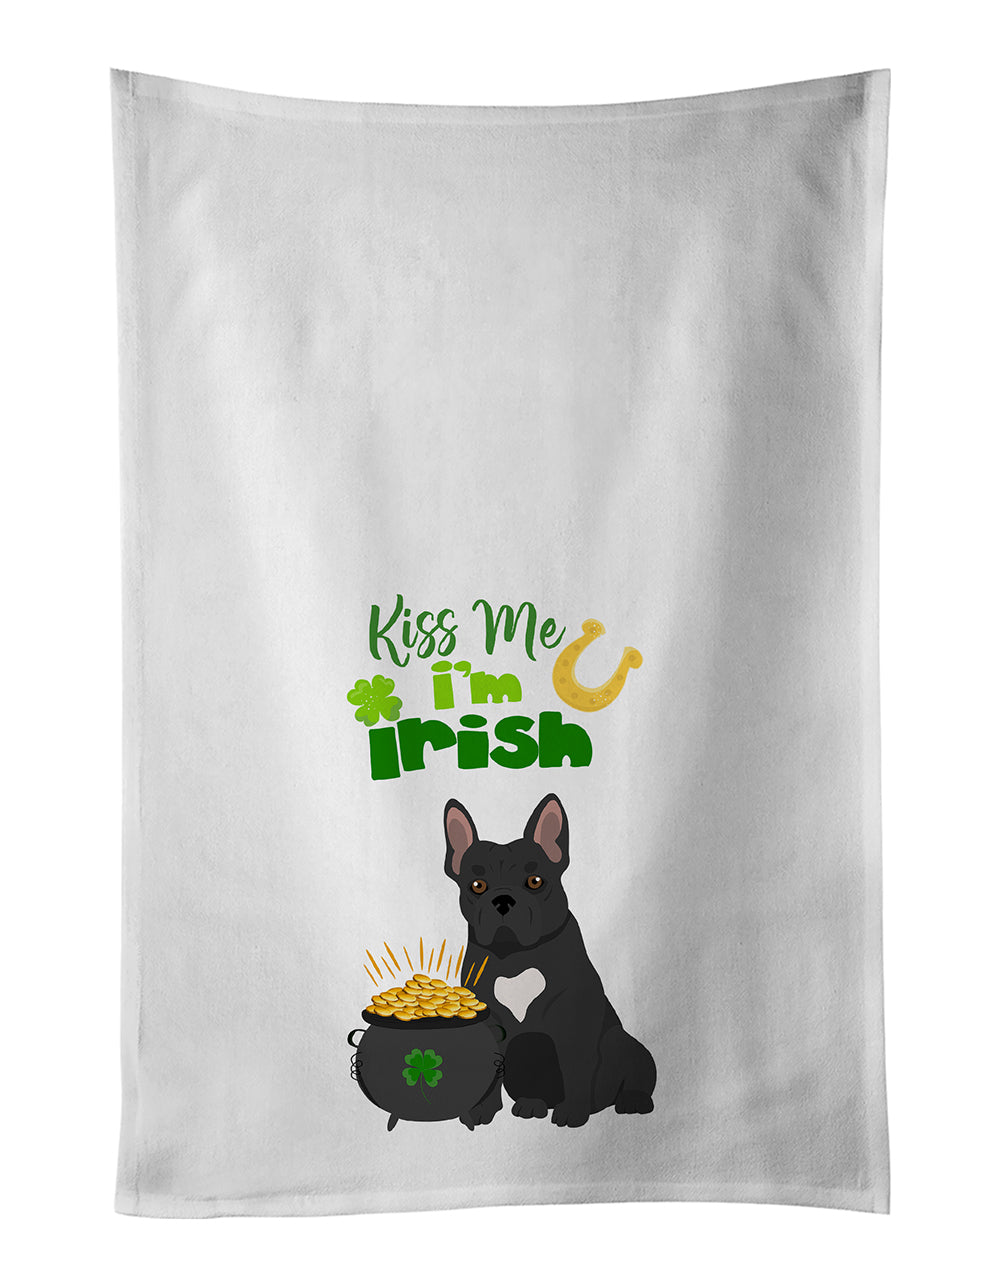 Buy this Black French Bulldog St. Patrick's Day White Kitchen Towel Set of 2 Dish Towels